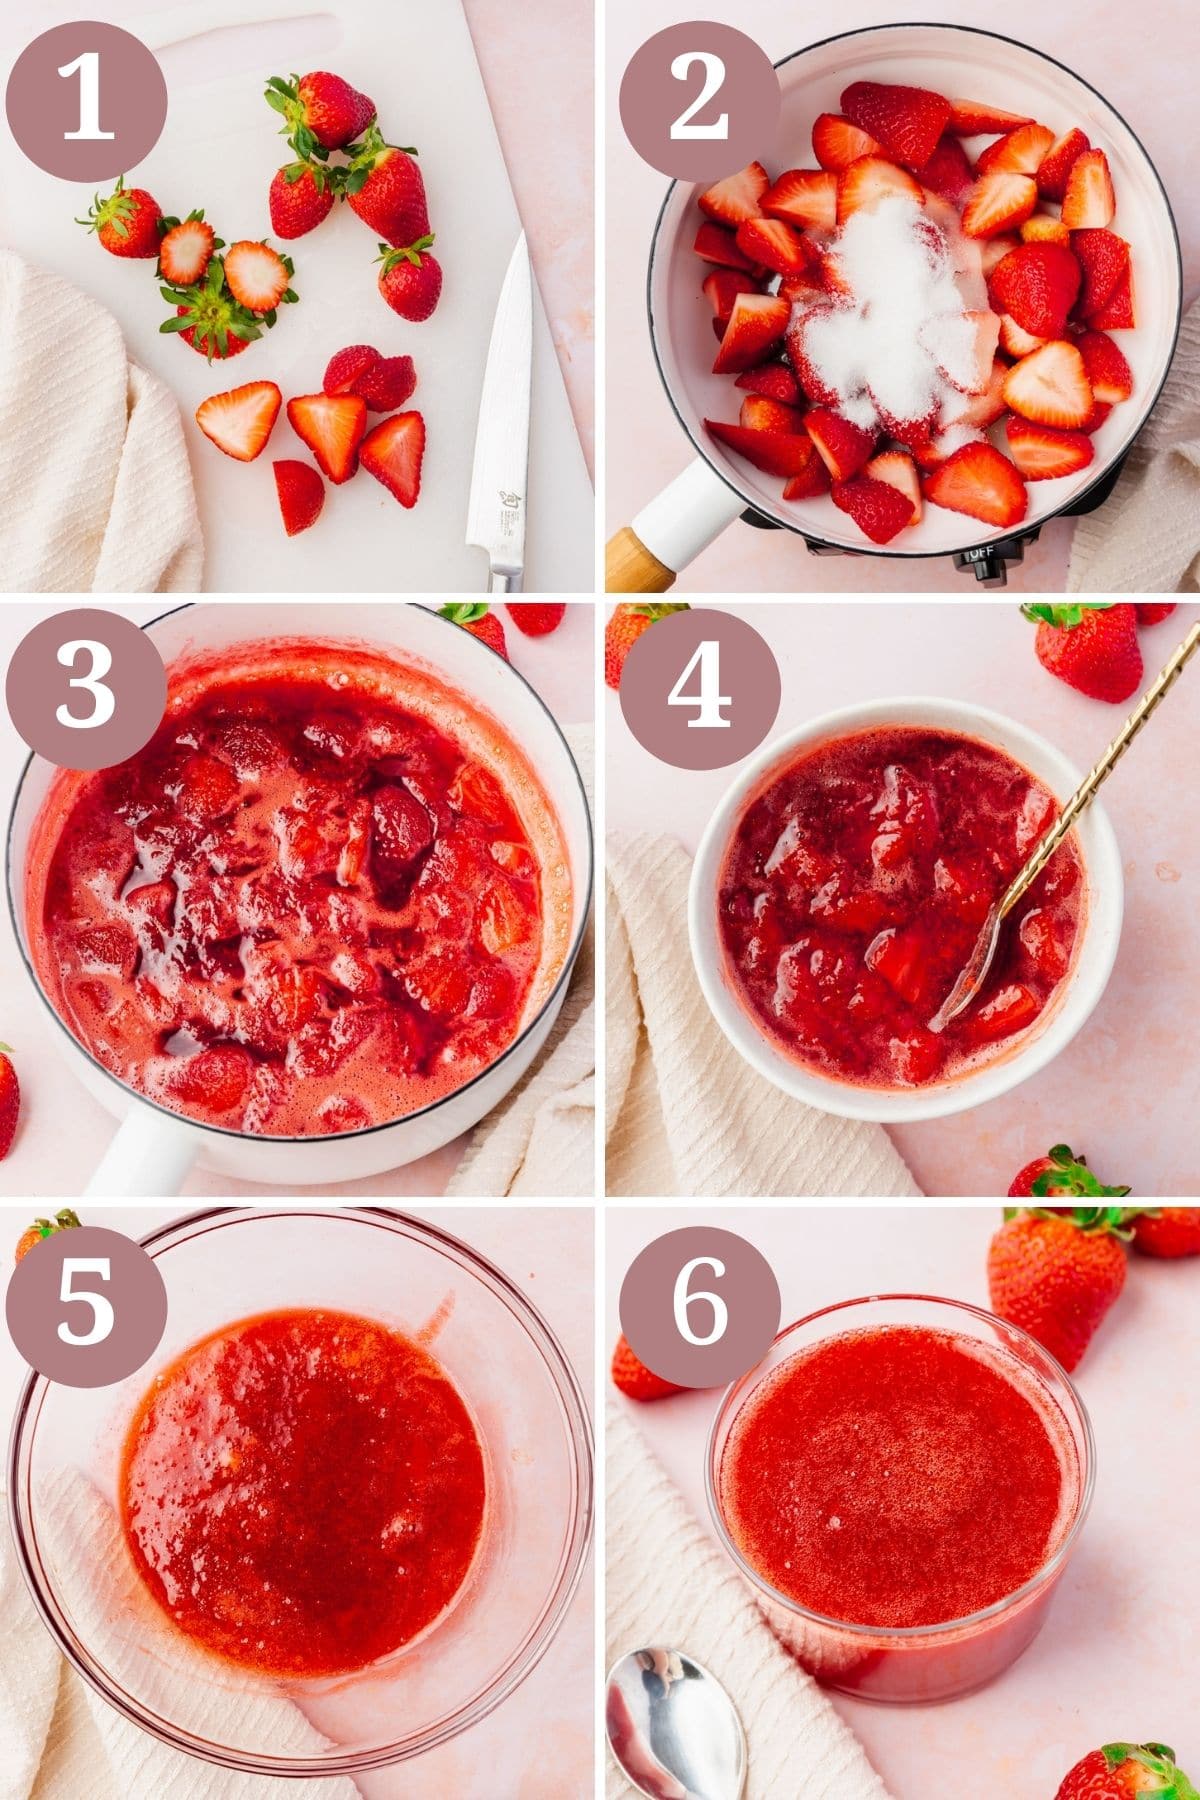 Steps 1-6 for making strawberry coulis.